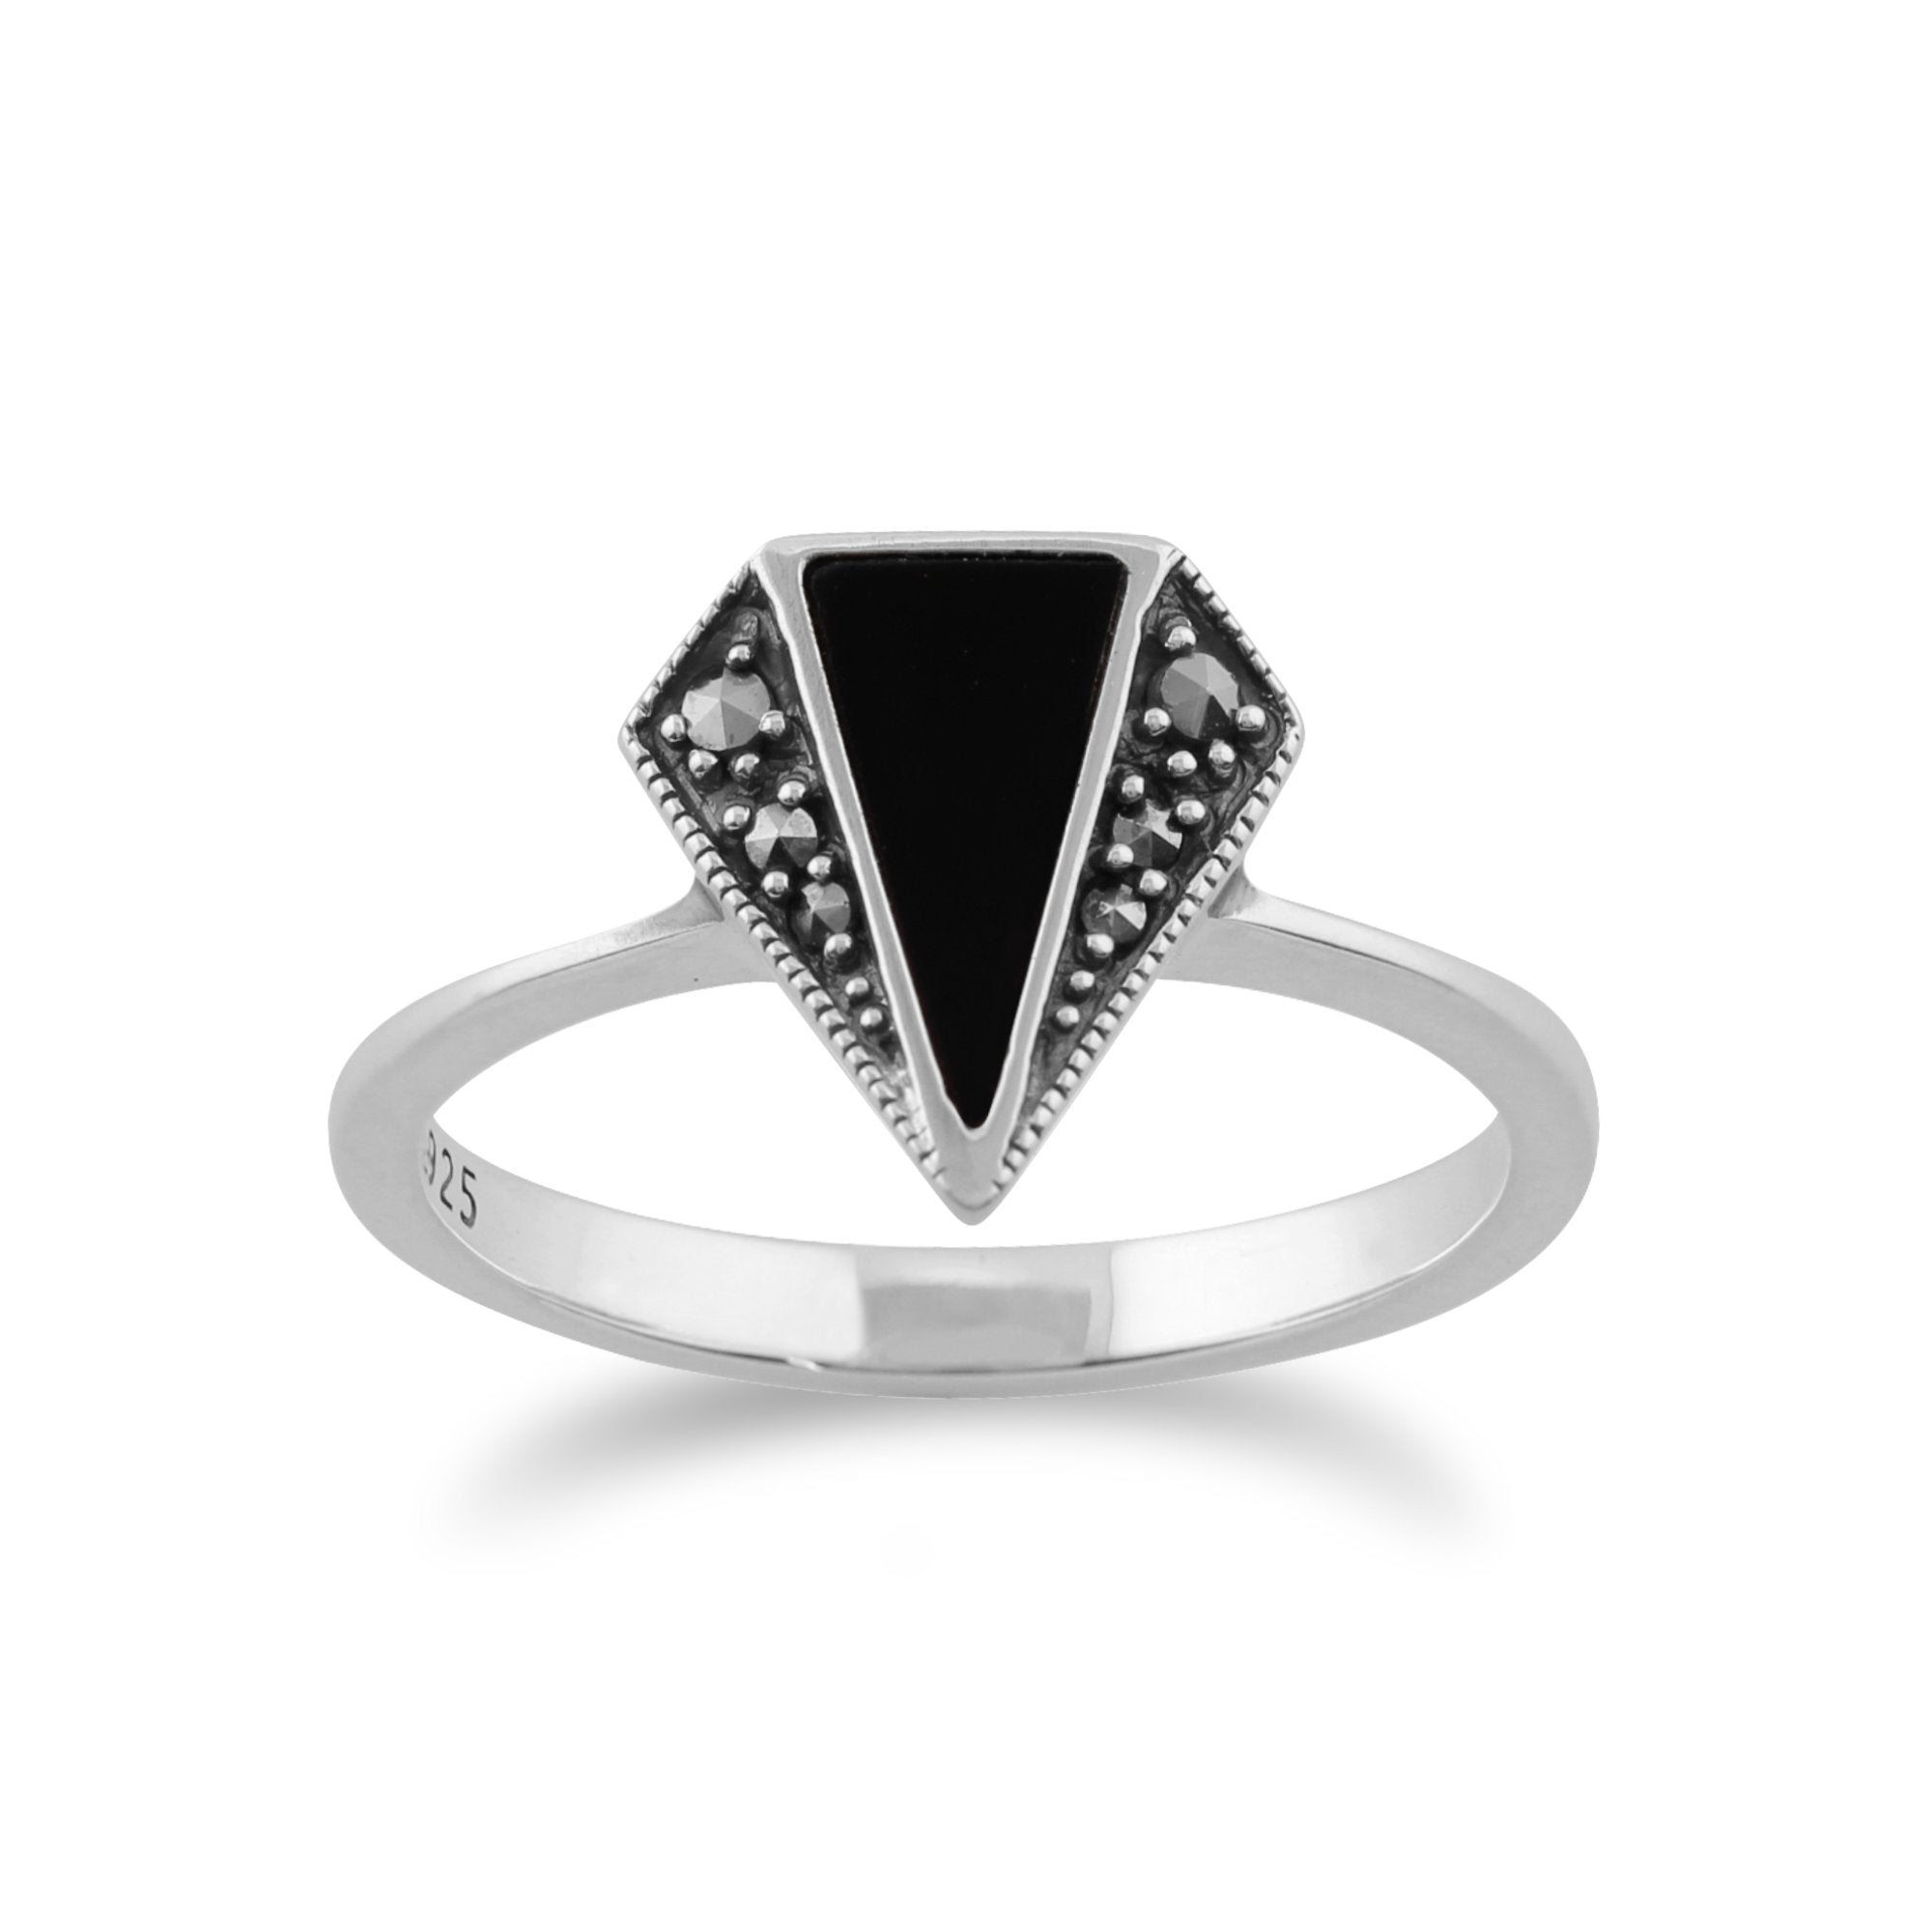 Art Deco Style Triangle Black Onyx & Marcasite Ring in 925 Sterling Silver